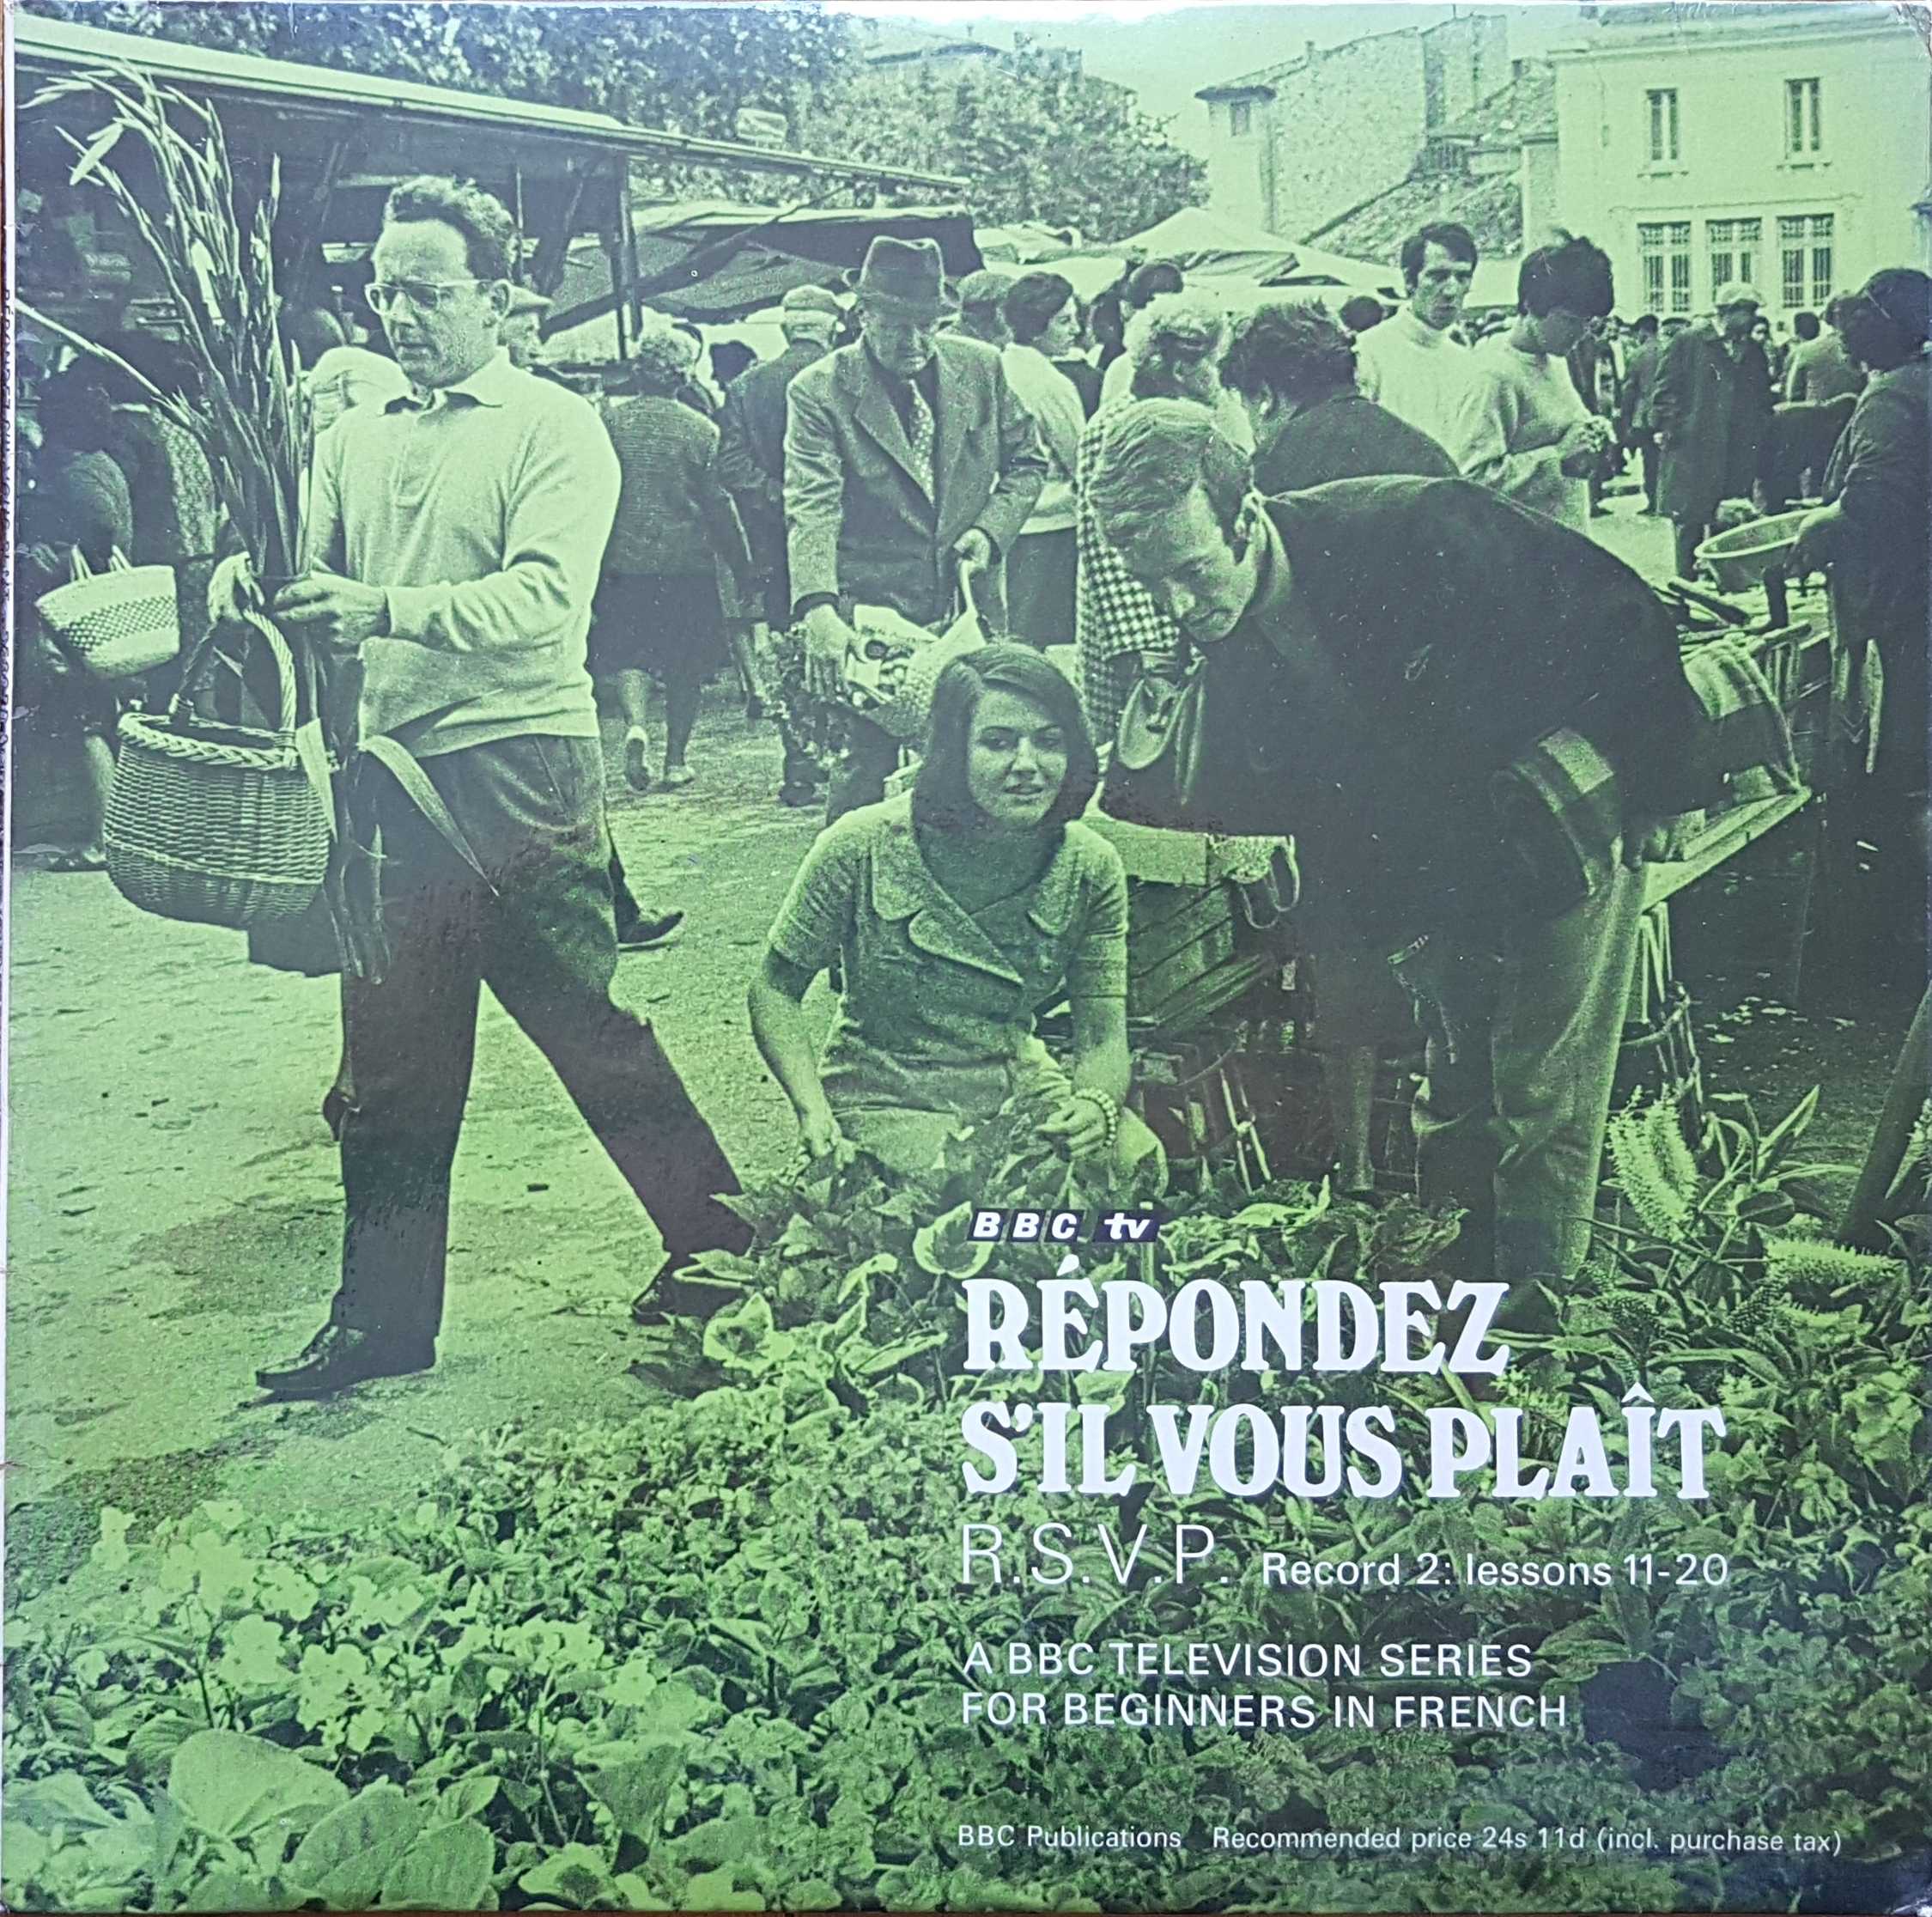 Picture of OP 141/142 Respondez s'il vous plait R. S. V. P. - Lessons 11 - 20 by artist Max Bellancourt / Joseph Cremona from the BBC albums - Records and Tapes library